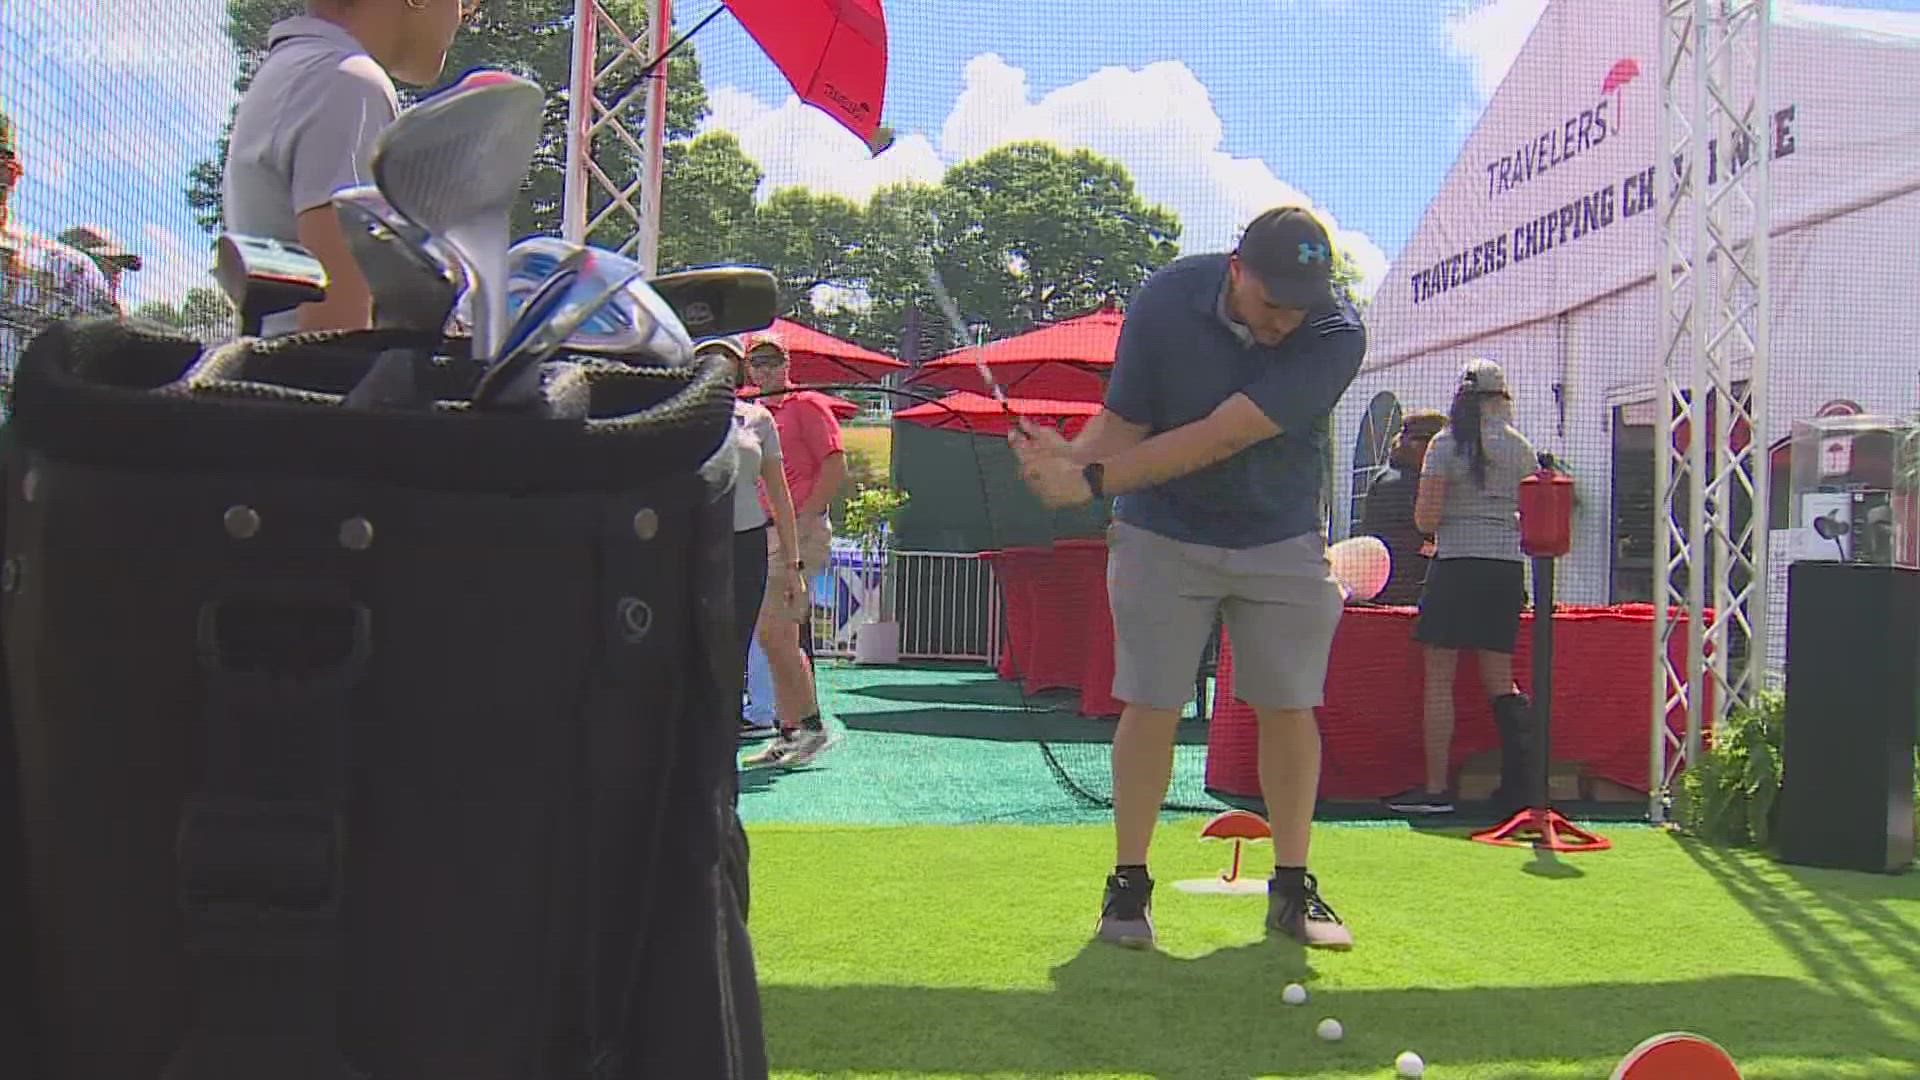 For the first time since 2019, full crowds were allowed back at the Travelers Championship.